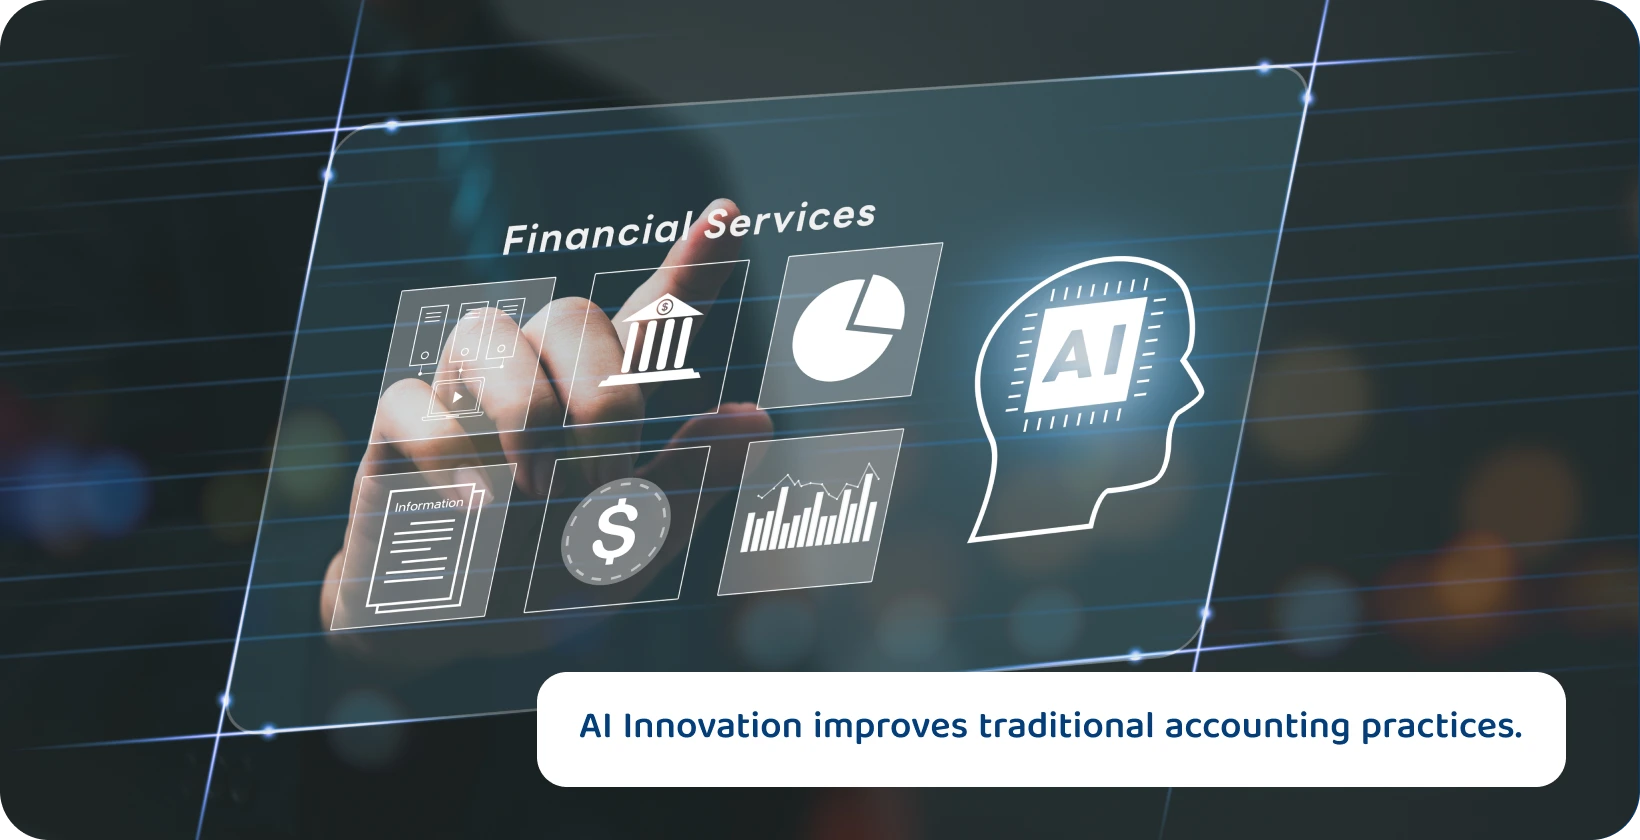 Artificial intelligence in accounting interface displaying analytics and reporting tools for enhanced decision-making.